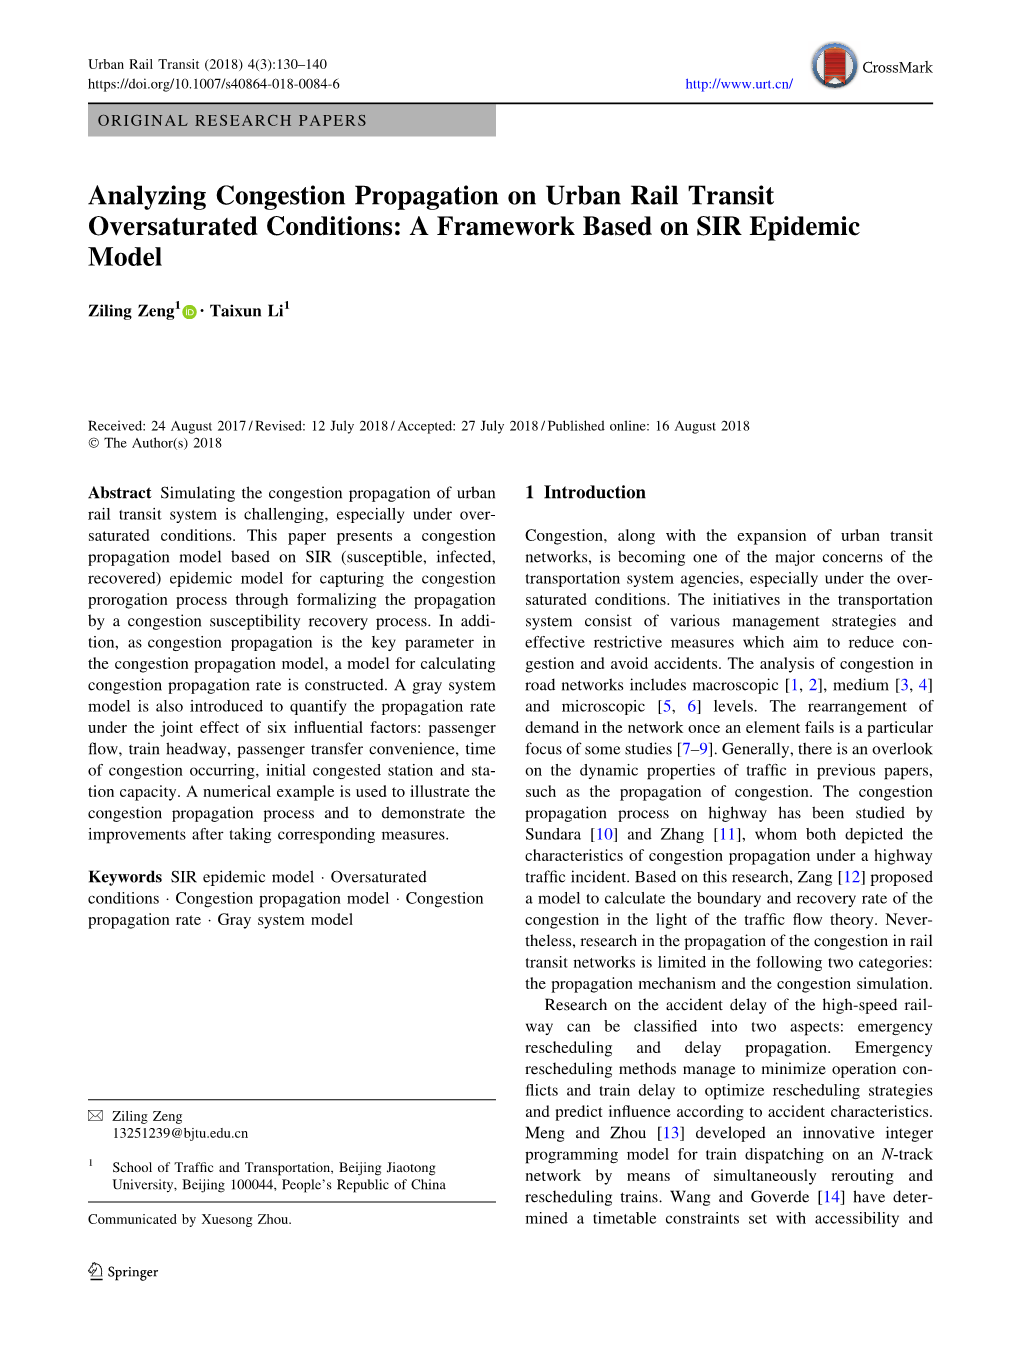 Analyzing Congestion Propagation on Urban Rail Transit Oversaturated Conditions: a Framework Based on SIR Epidemic Model